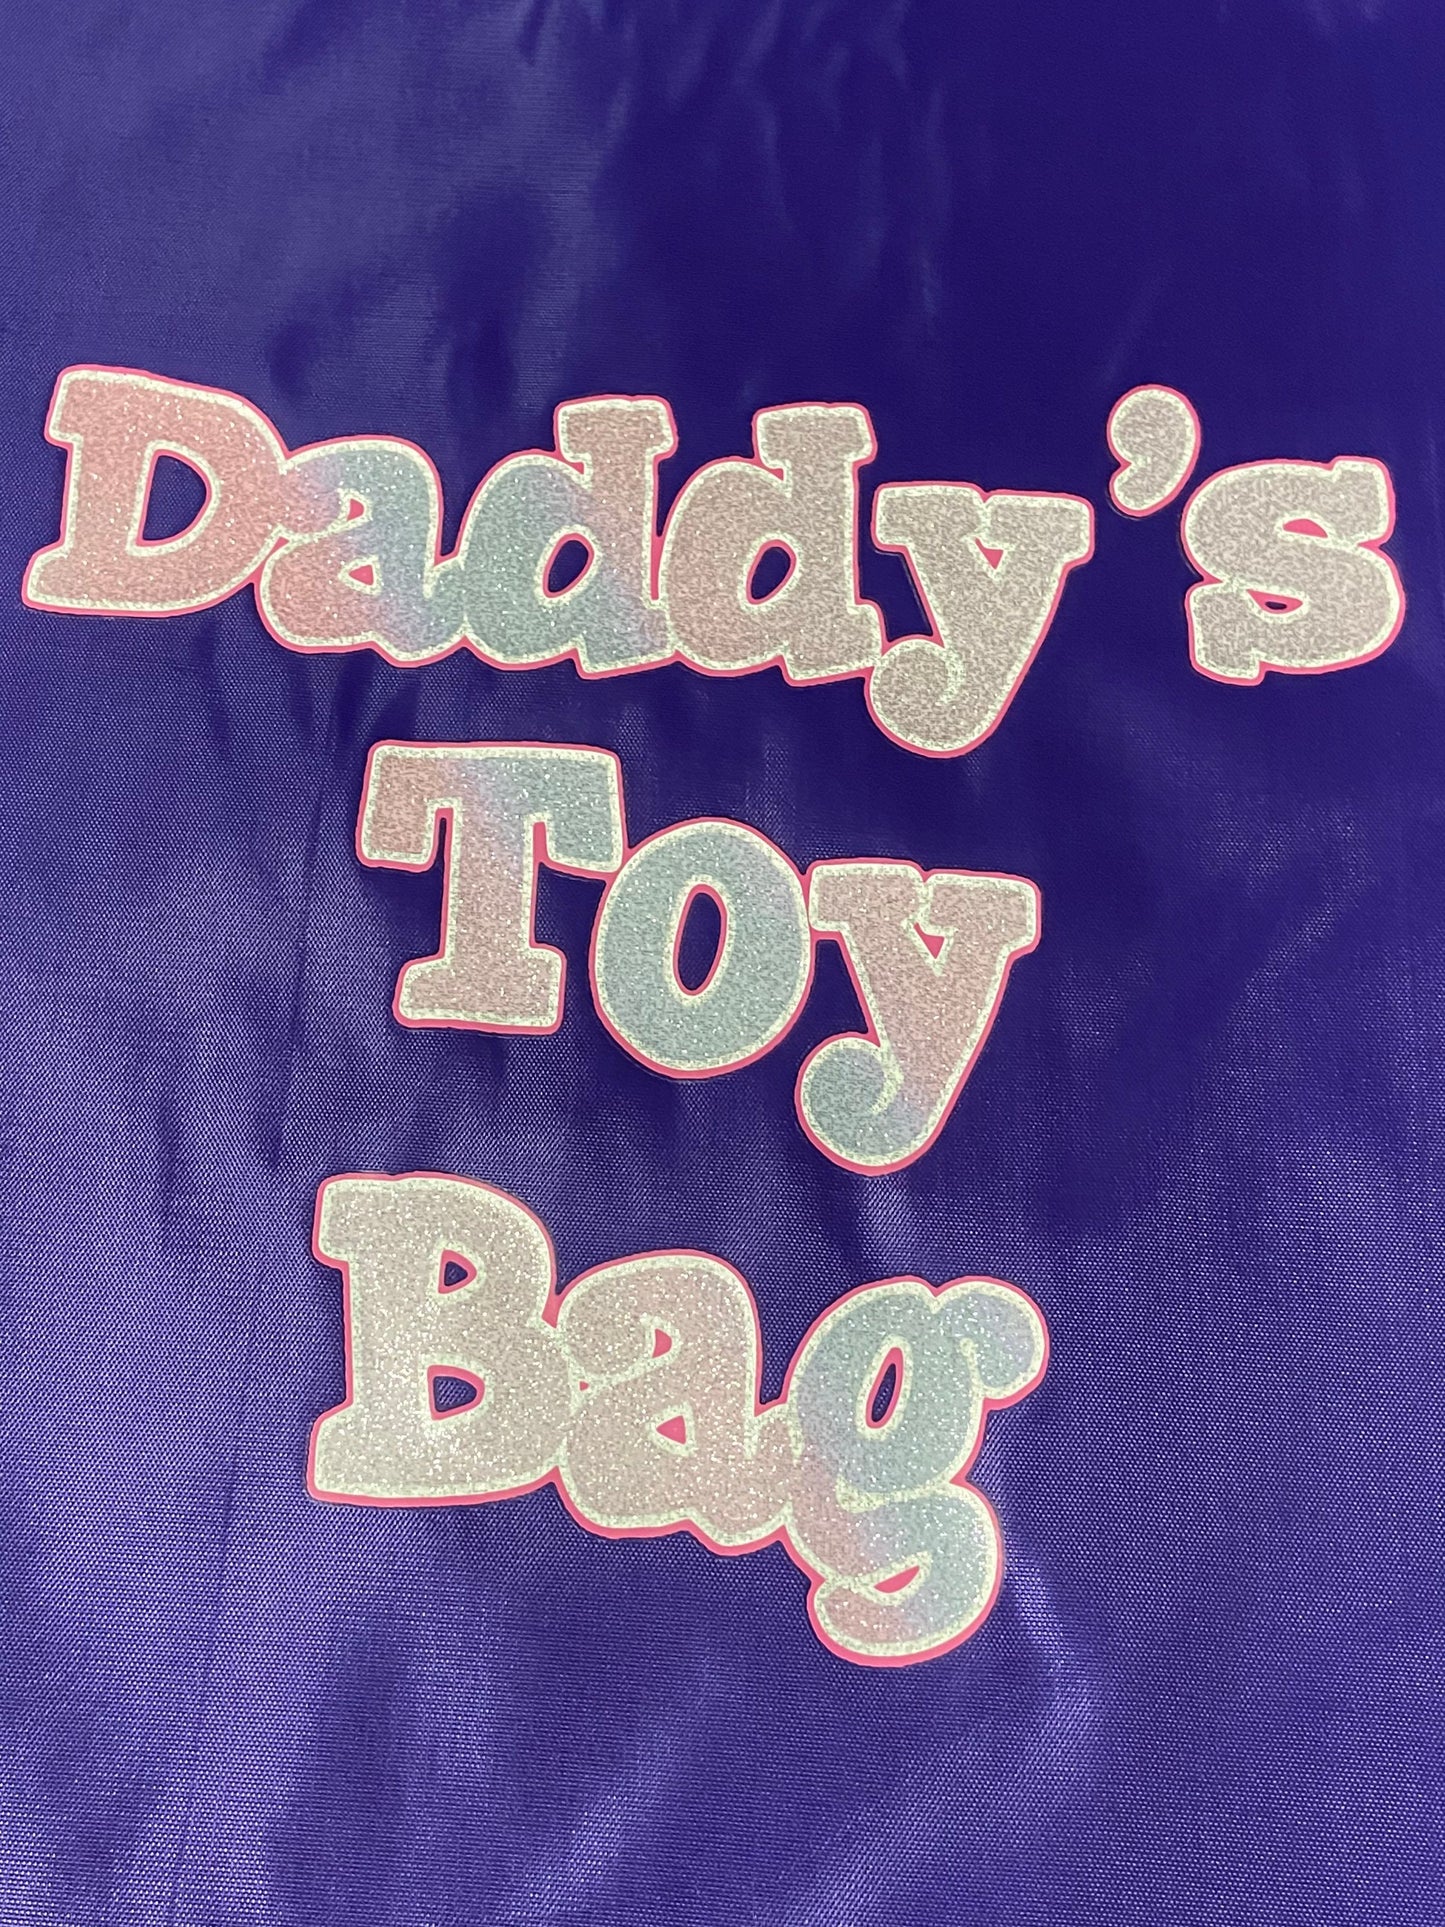 Daddy's Toy Bag Beginners Purple Bondage Kit Daddy Master DDLG BDSM CGLG Dominant Rope Cuffs Leash Whip Nipple Clamps